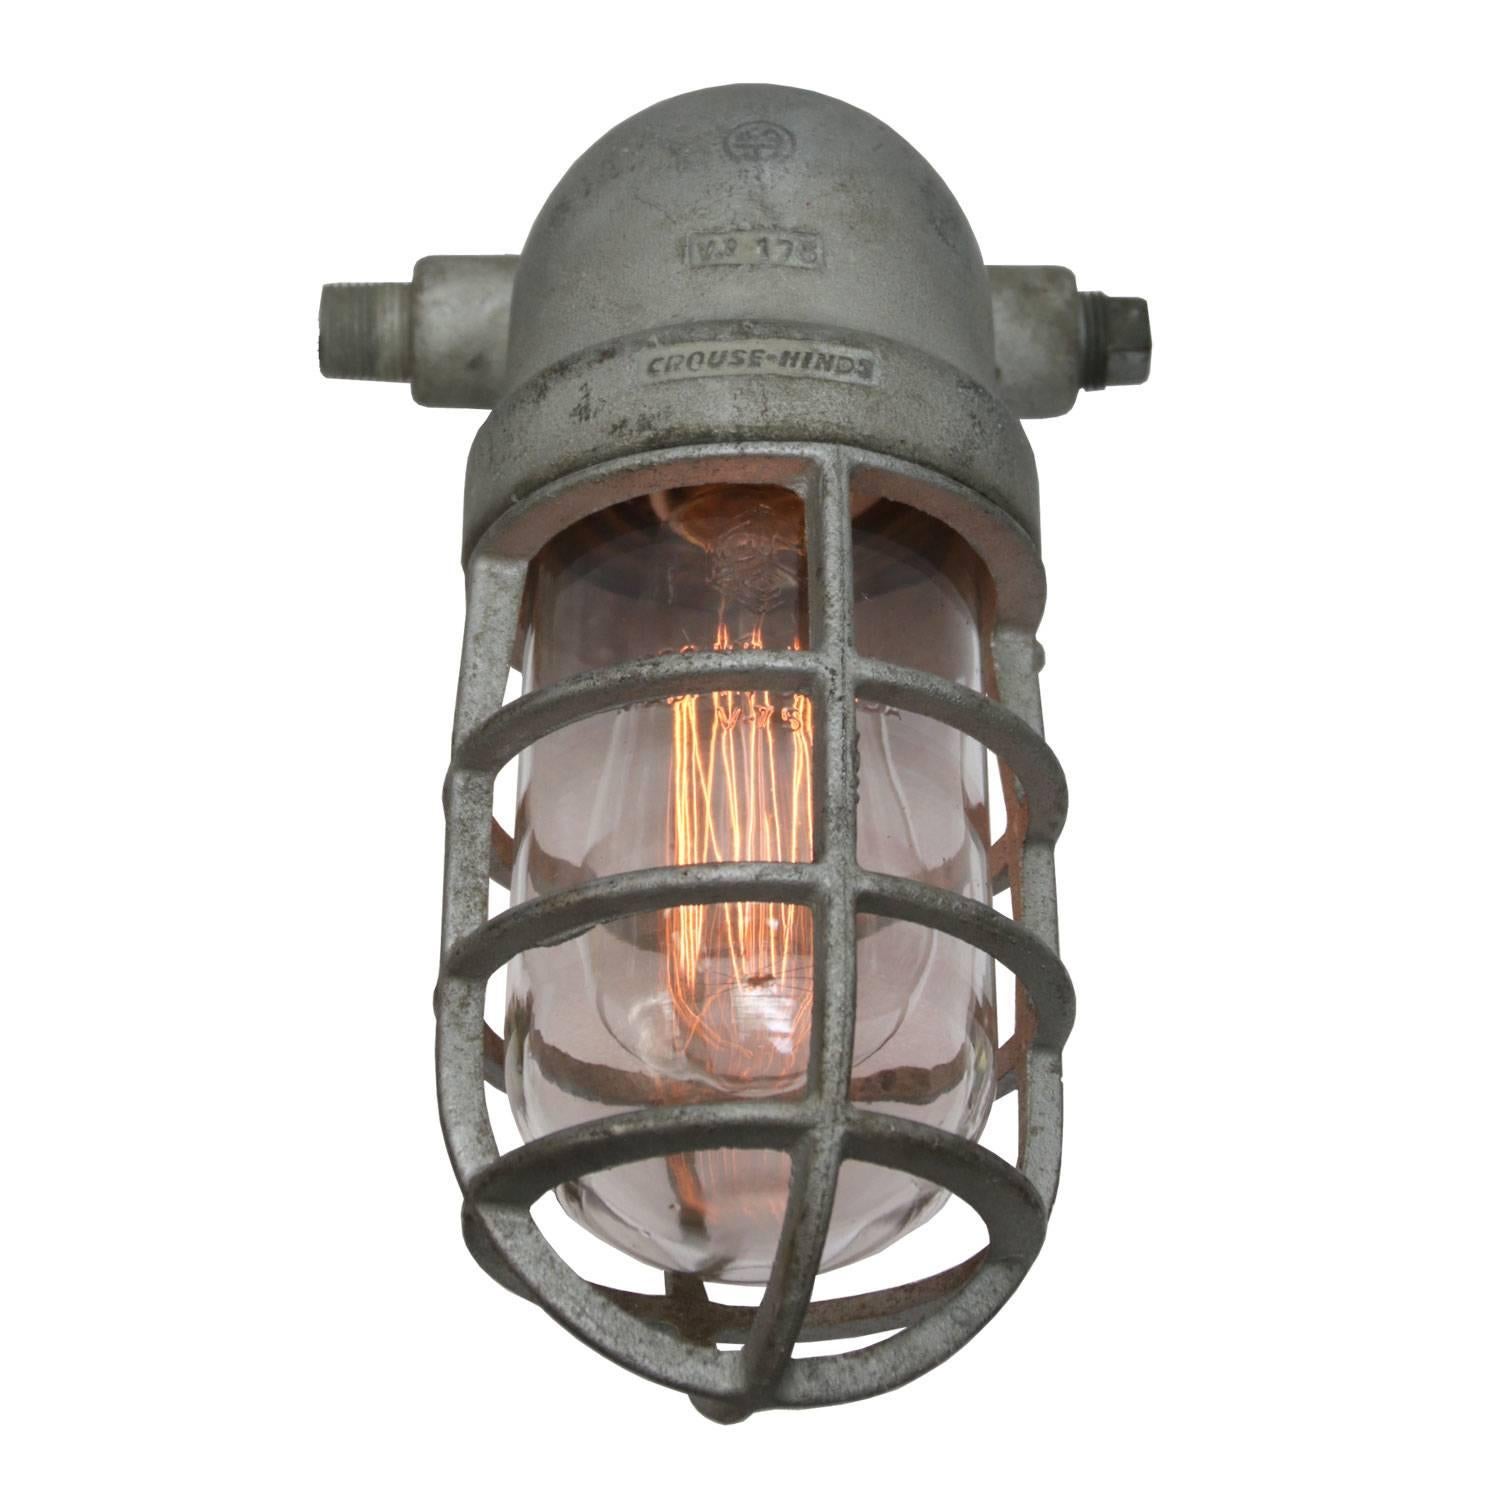 Crouse Hinds USA Industrial wall light. Cast aluminium with clear glass.

Weight: 2.7 kg / 6 lb

All lamps have been made suitable by international standards for incandescent light bulbs, energy-efficient and LED bulbs. E26/E27 bulb holders and